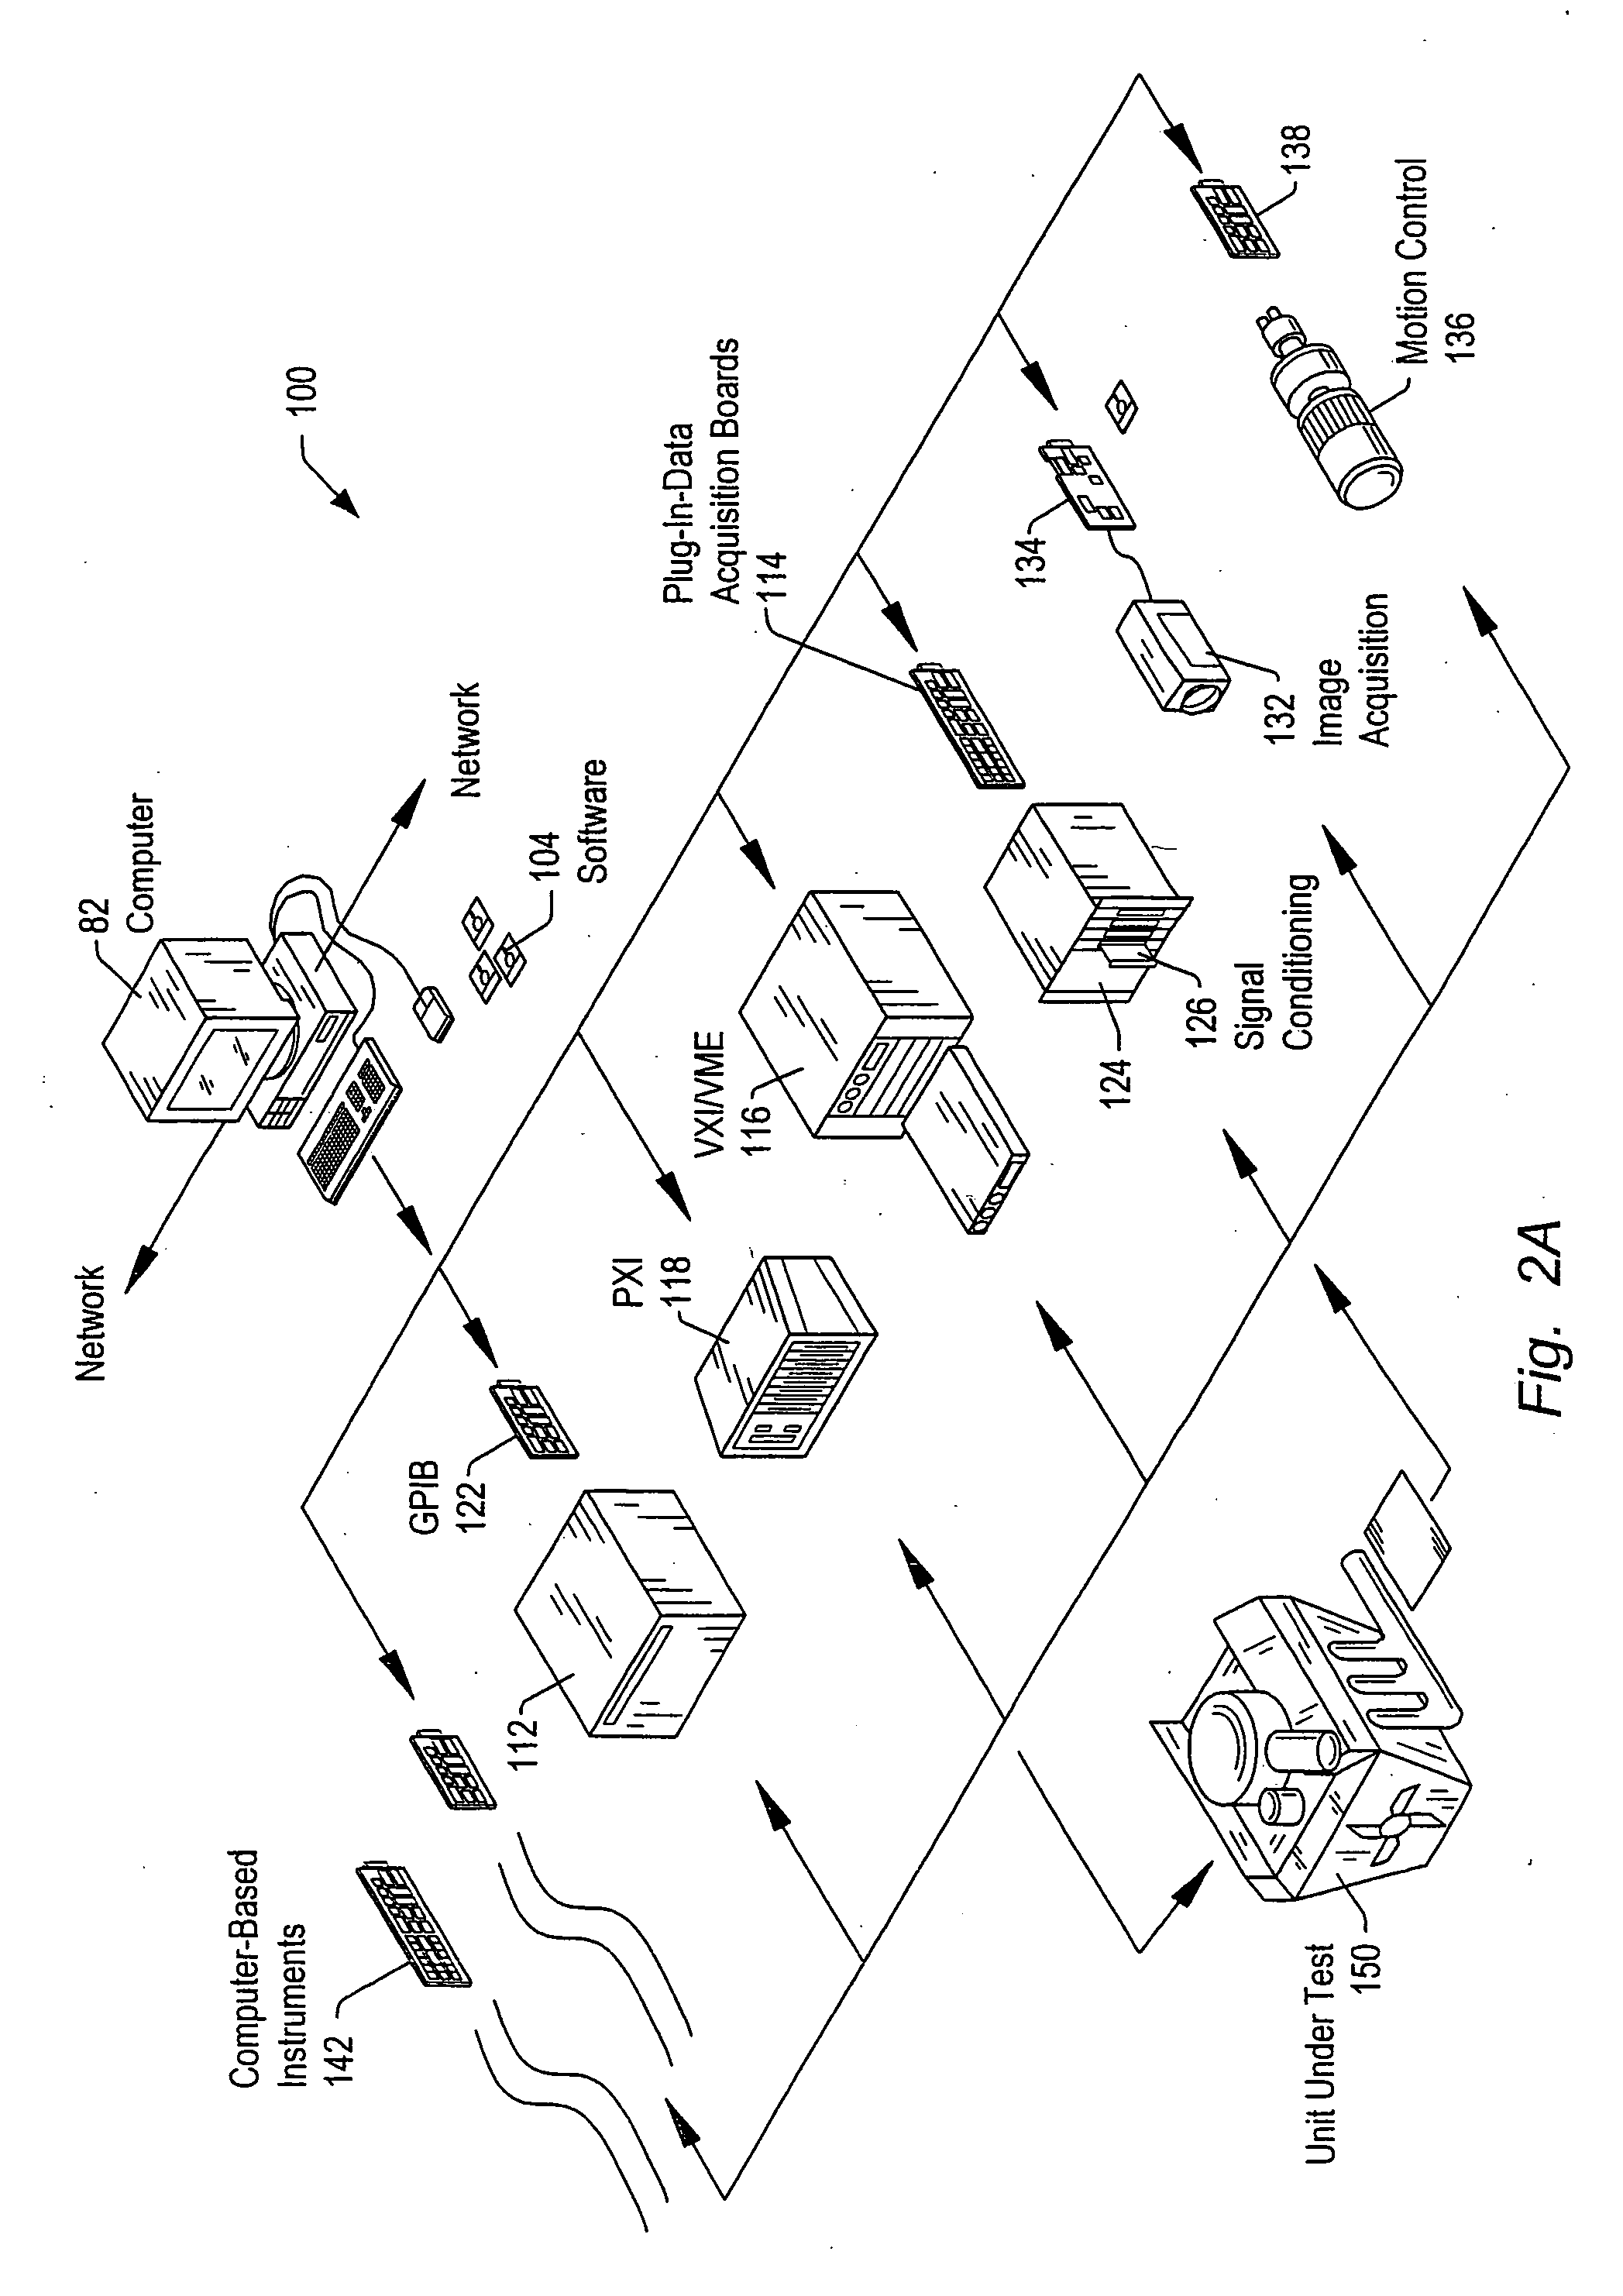 Network-based system for selecting or purchasing hardware products